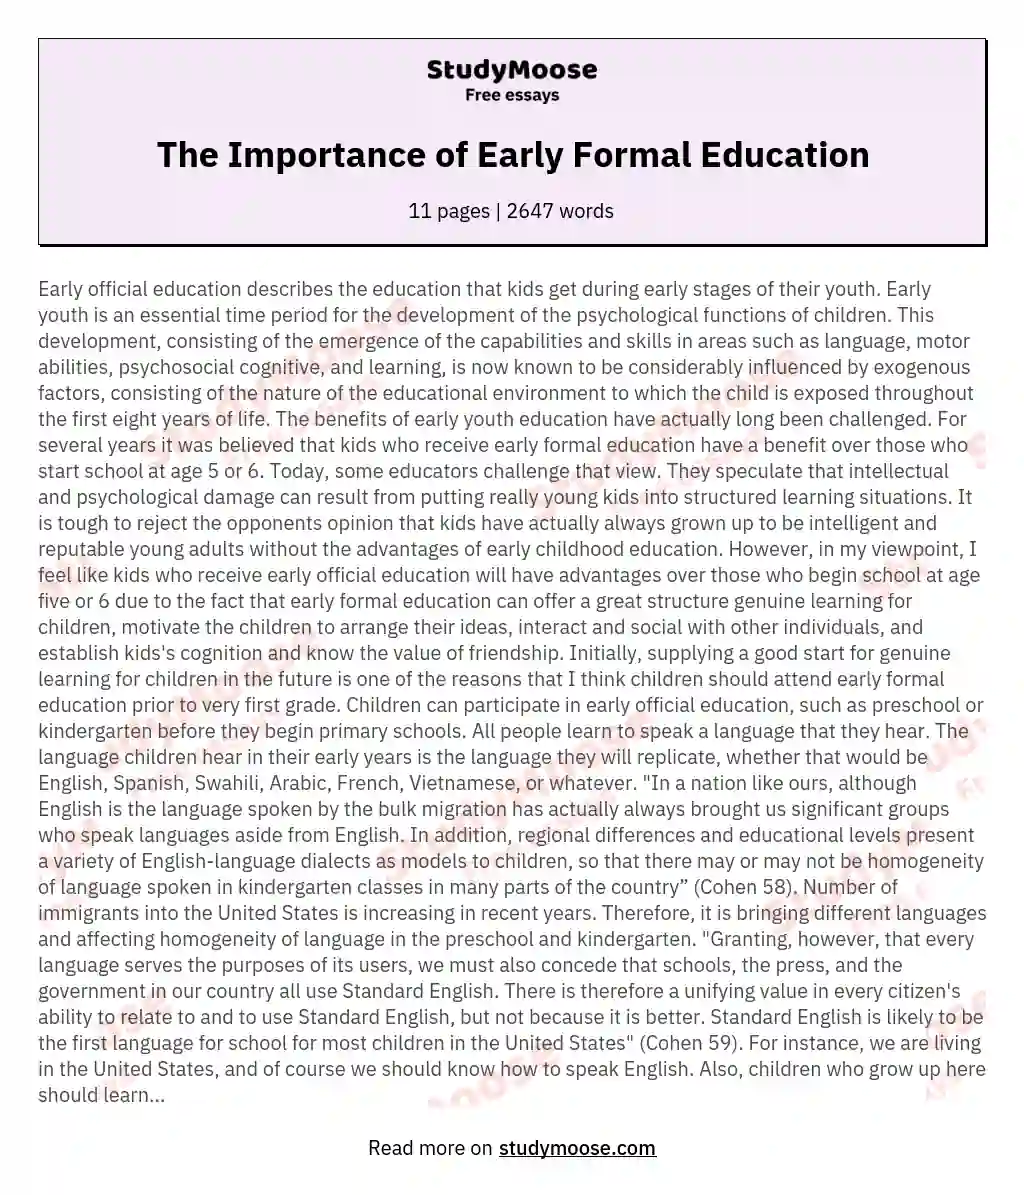 The Importance of Early Formal Education essay